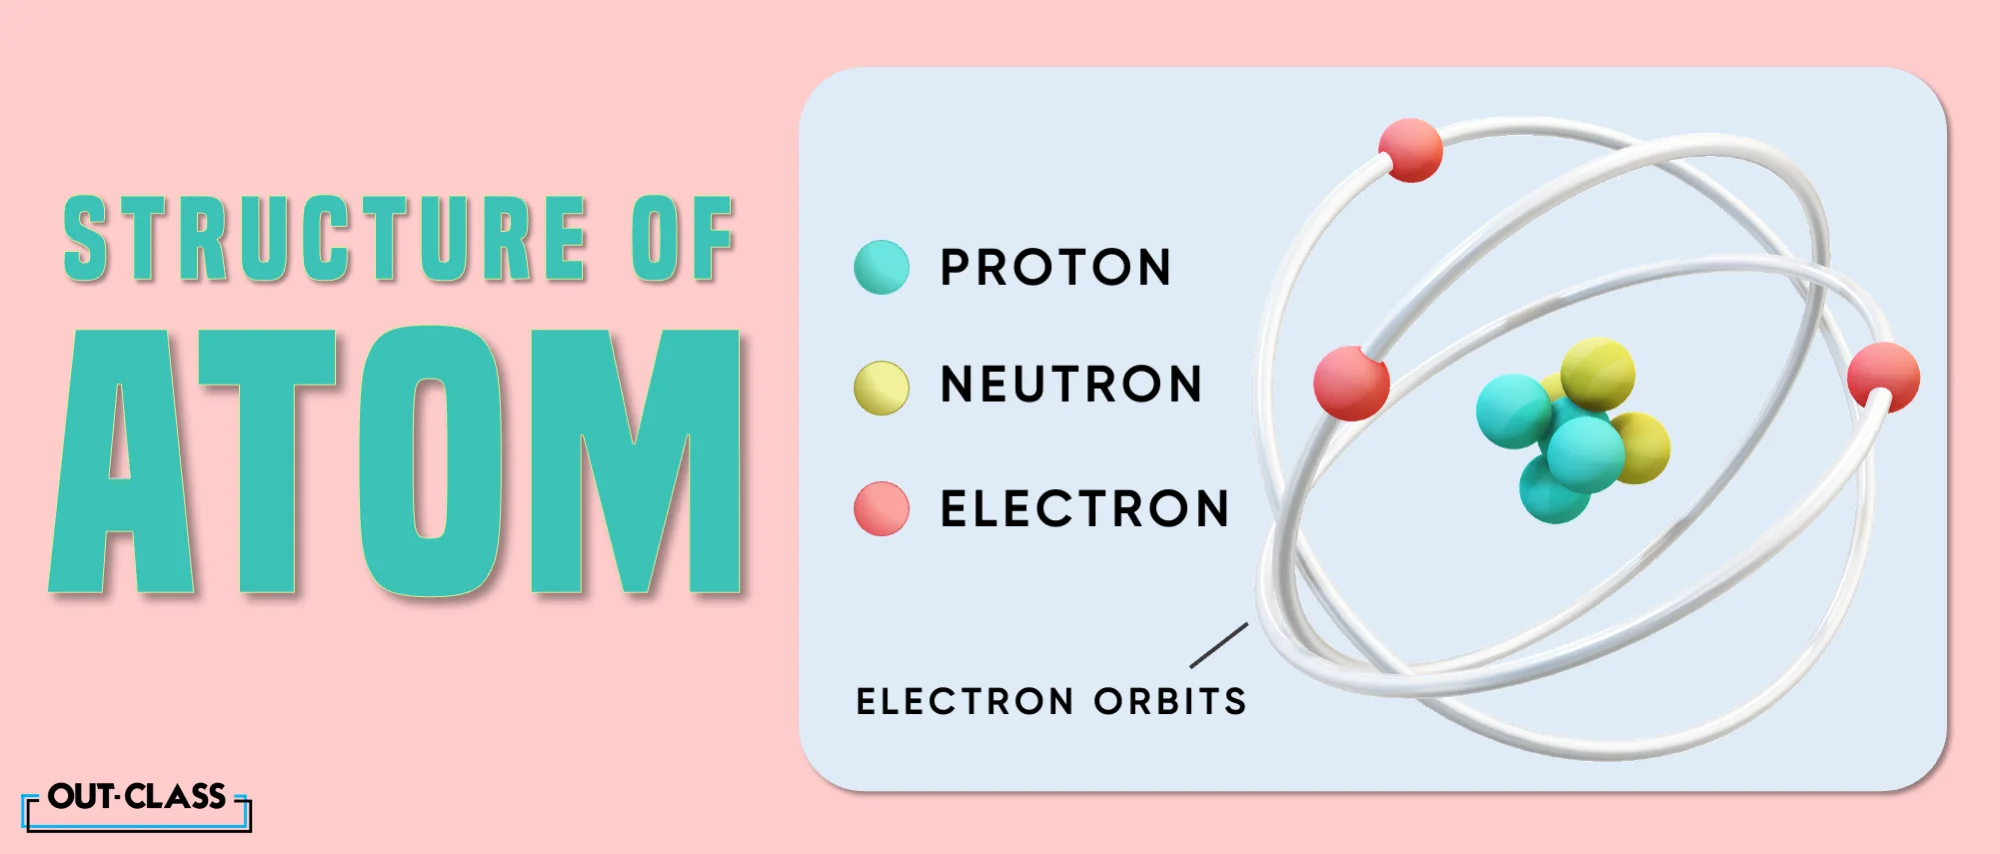 The structure of an atom is one of the basic differences between an atom and an ion. 